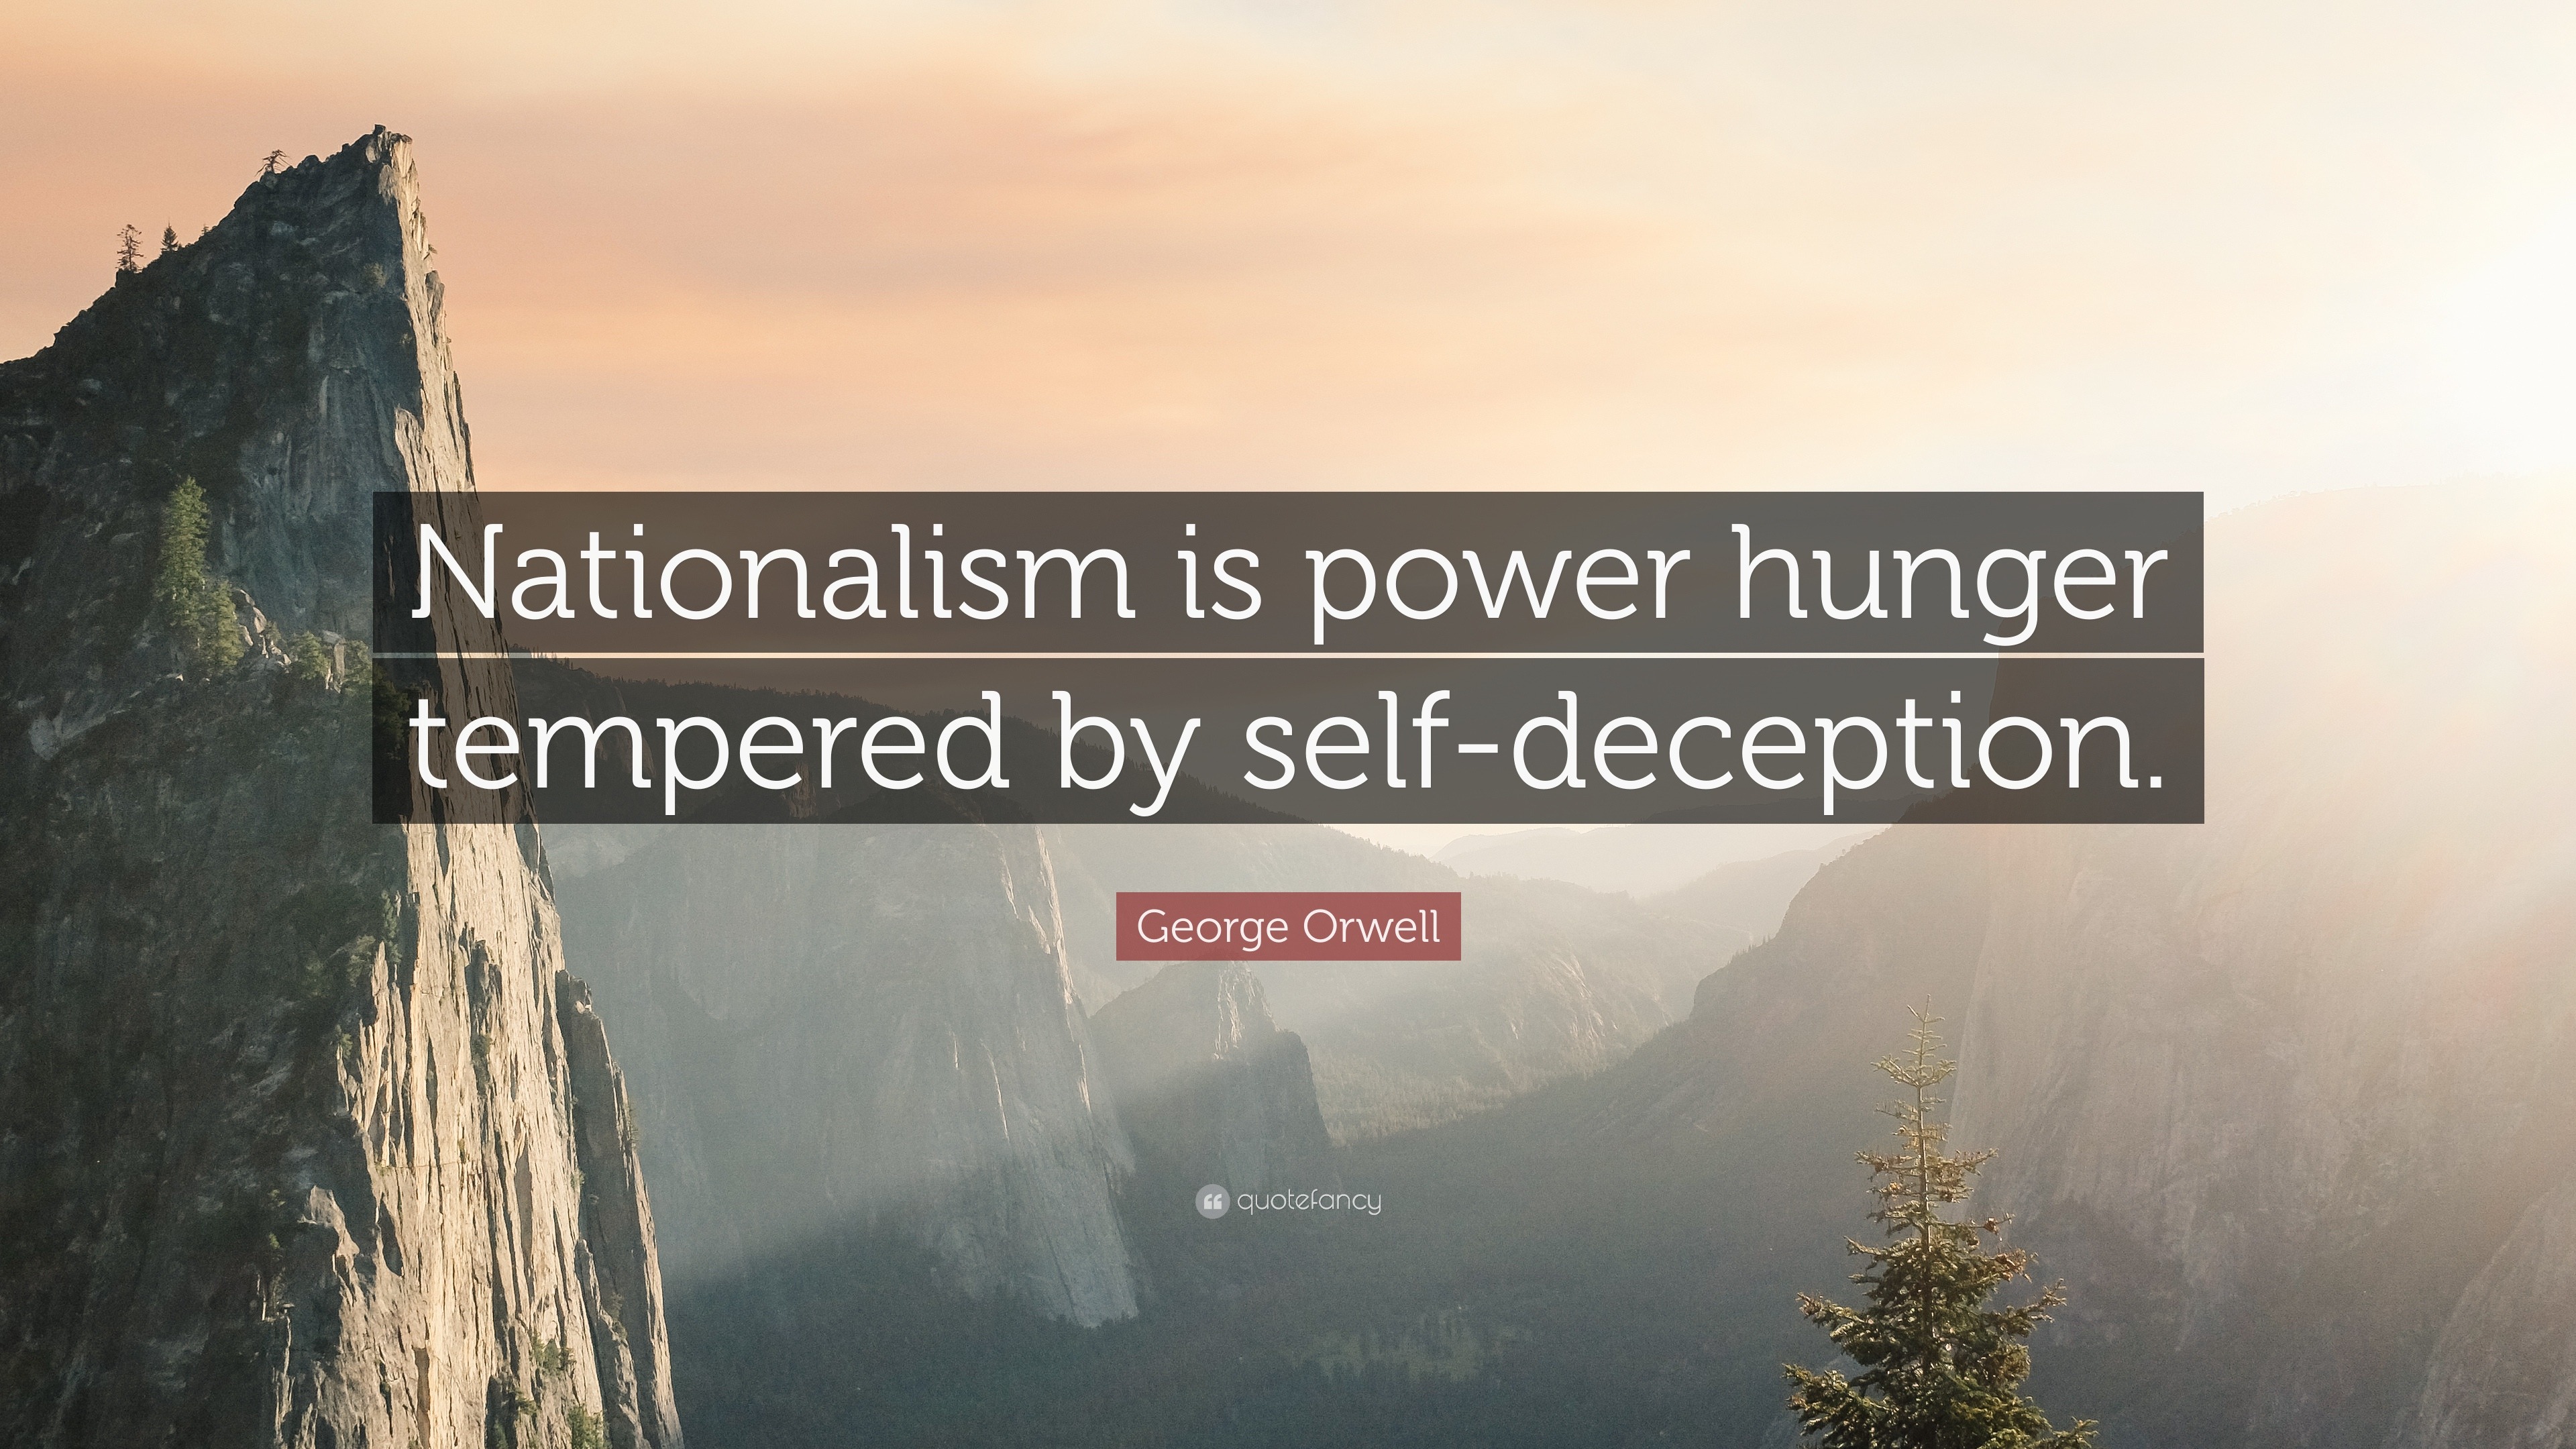 notes on nationalism by george orwell